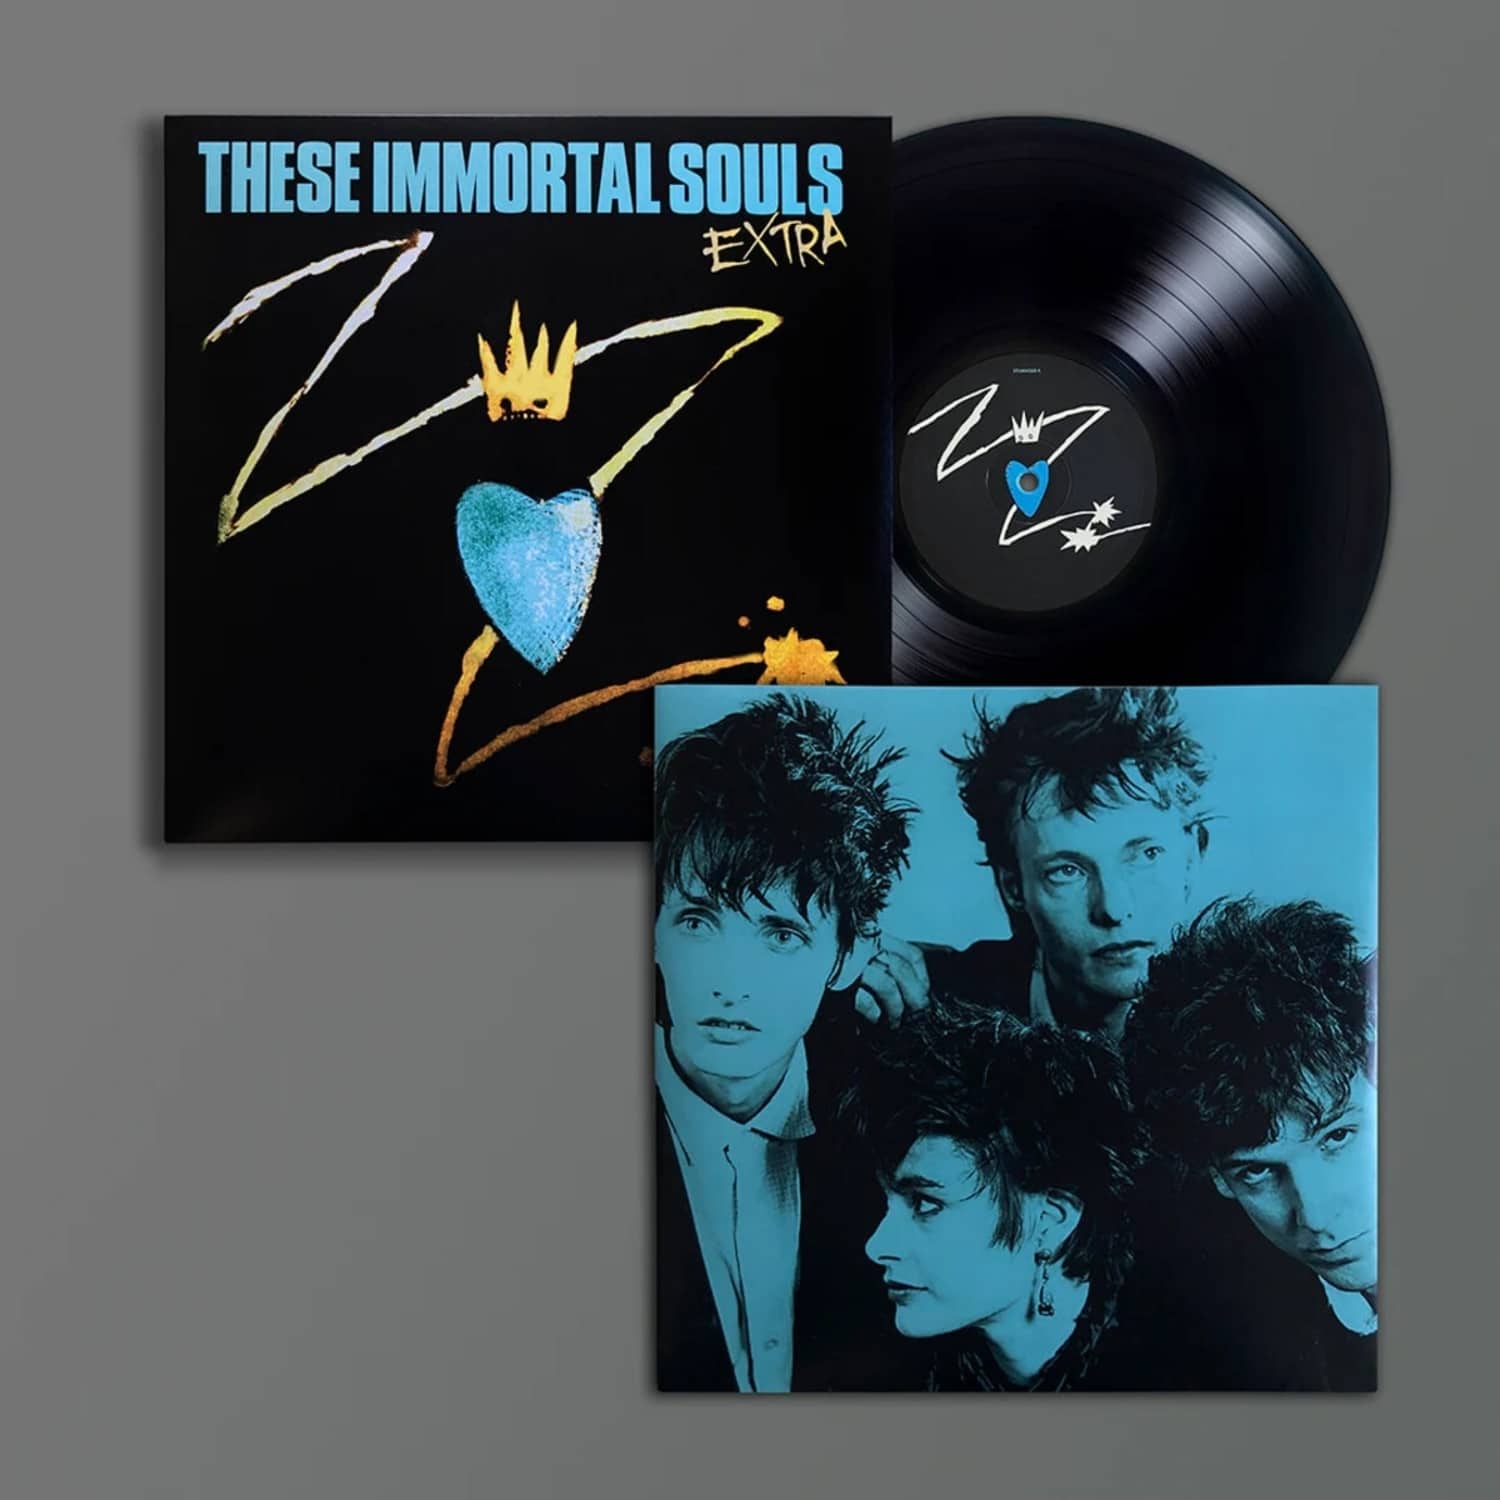 These Immortal Souls - EXTRA 